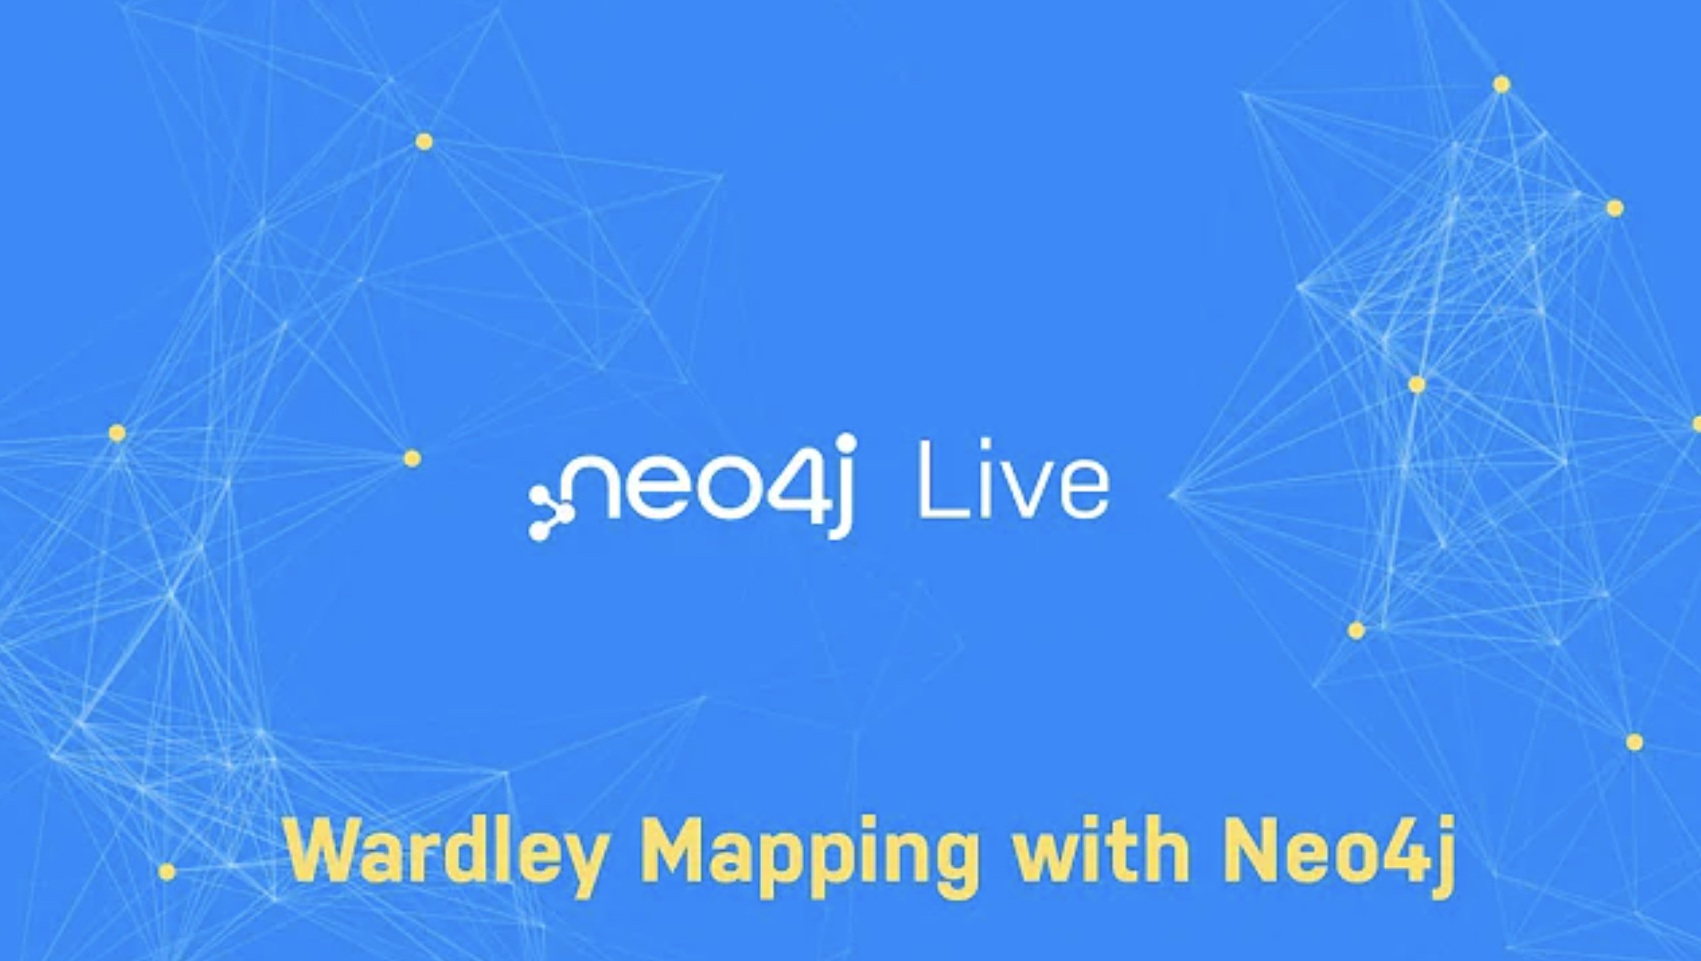 Wardley Mapping with Neo4j Preview